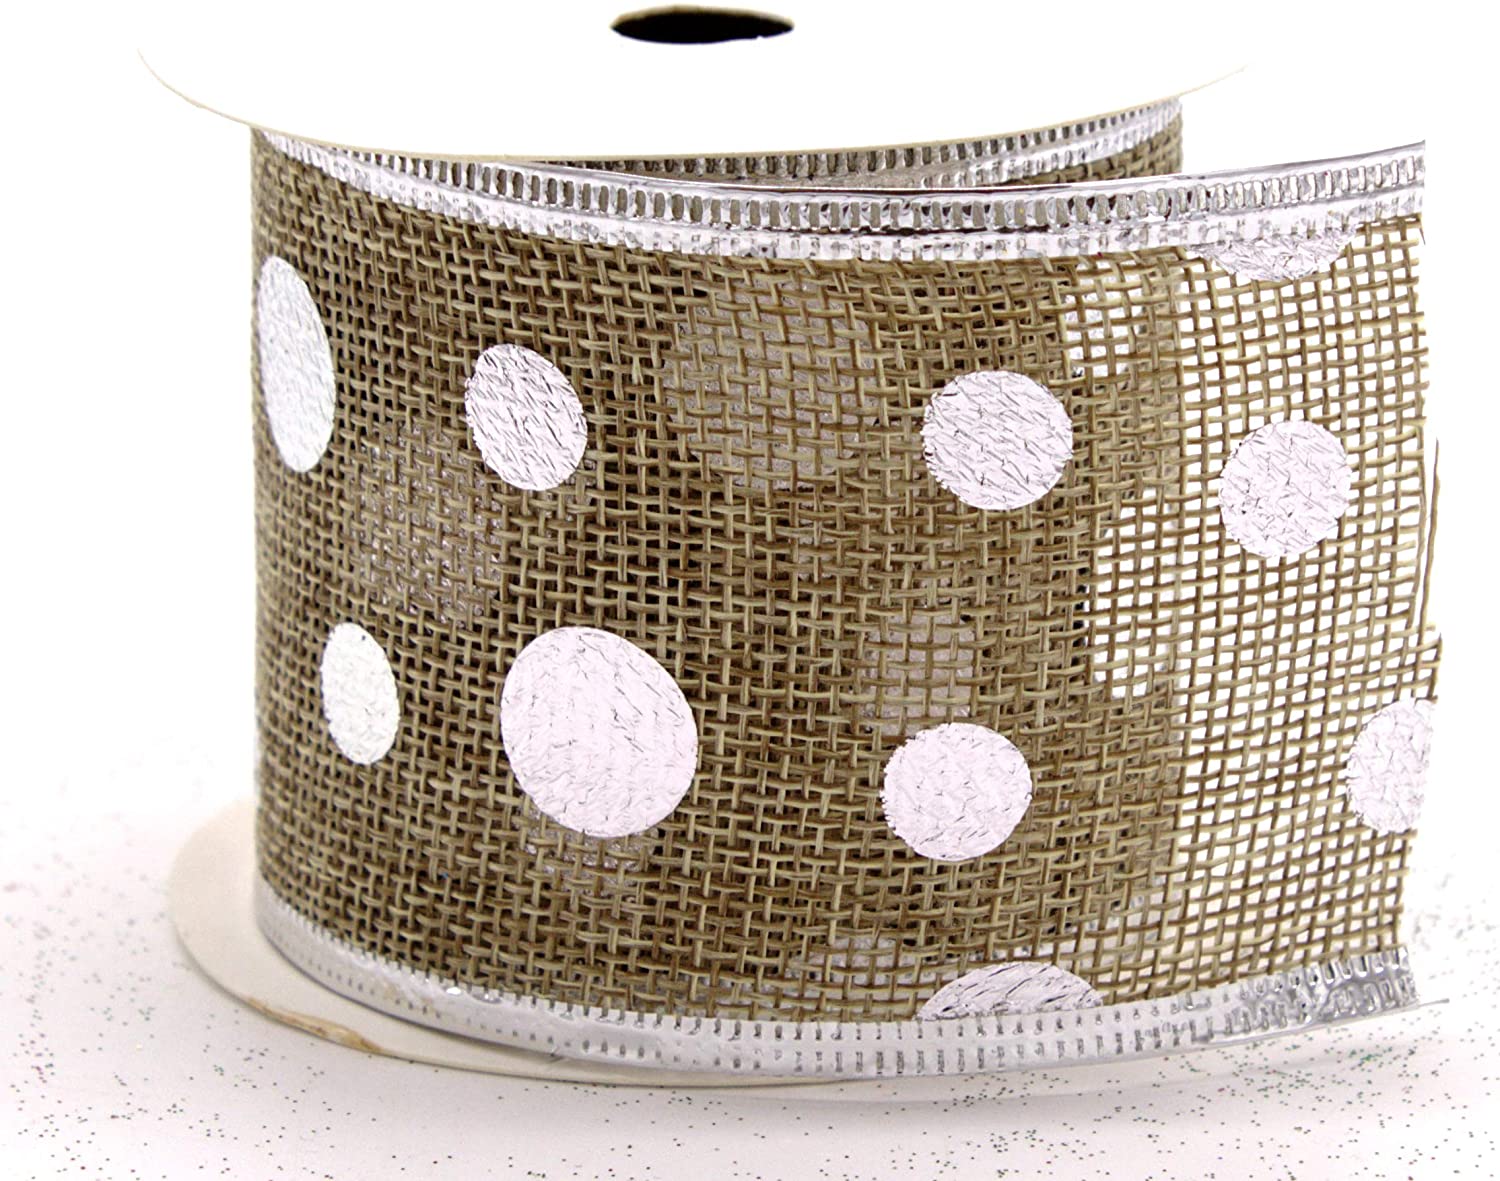 Daro Decorative Ribbon 6.3 Cm X 2.7 M In Grey Or Natural - Pack Of 1 Or 3 P